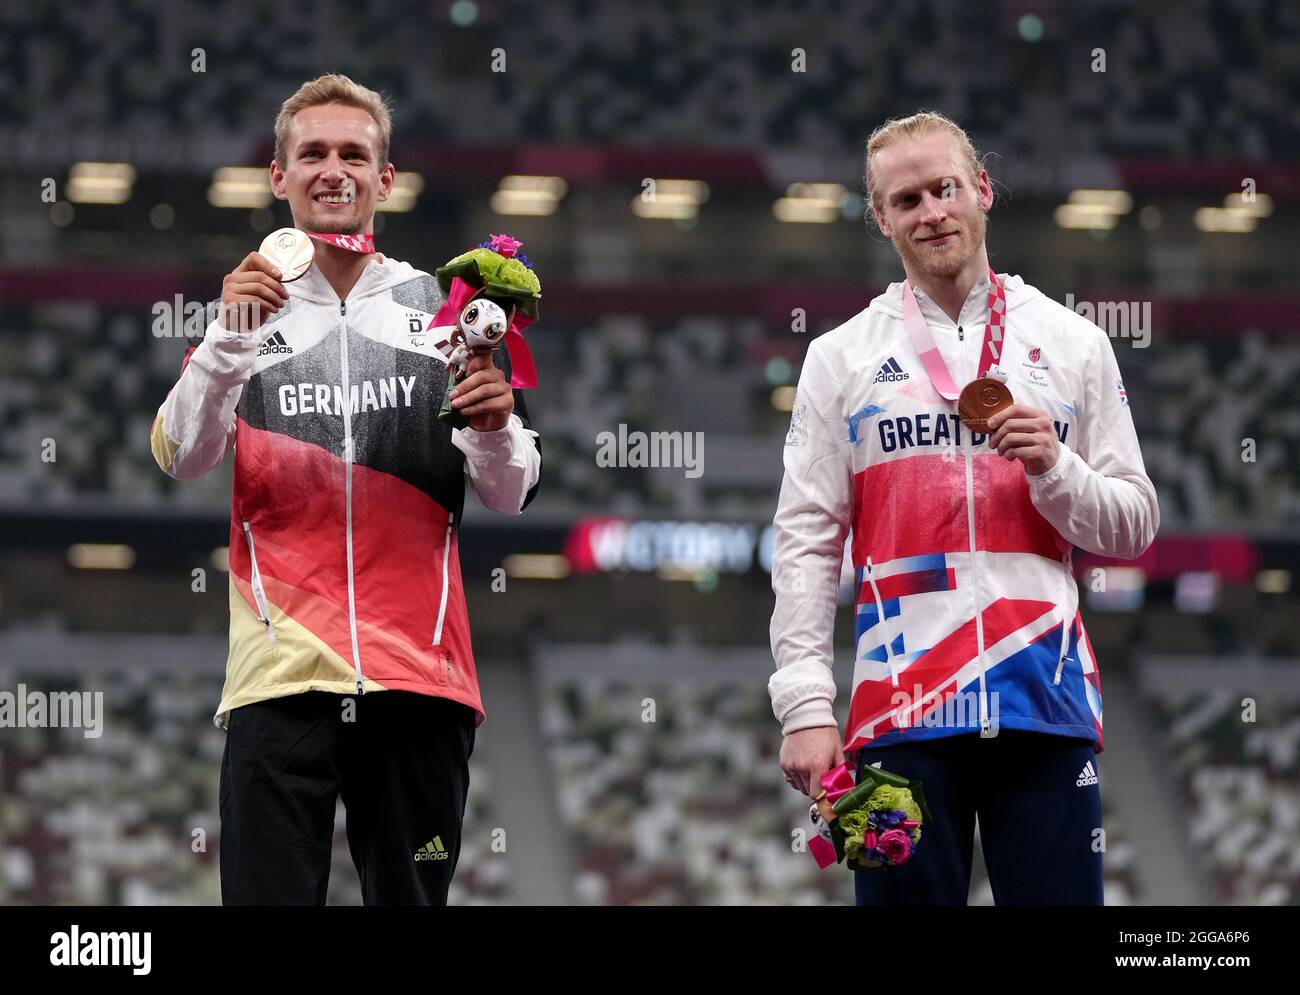 Great Britain's Jonnie Peacock with his Bronze medal alongside joint Bronze medal winner Germany’s Johannes Floors for the Men's 100m - T64 during the Athletics at the Olympic Stadium on day six of the Tokyo 2020 Paralympic Games in Japan. Picture date: Monday August 30, 2021. Stock Photo